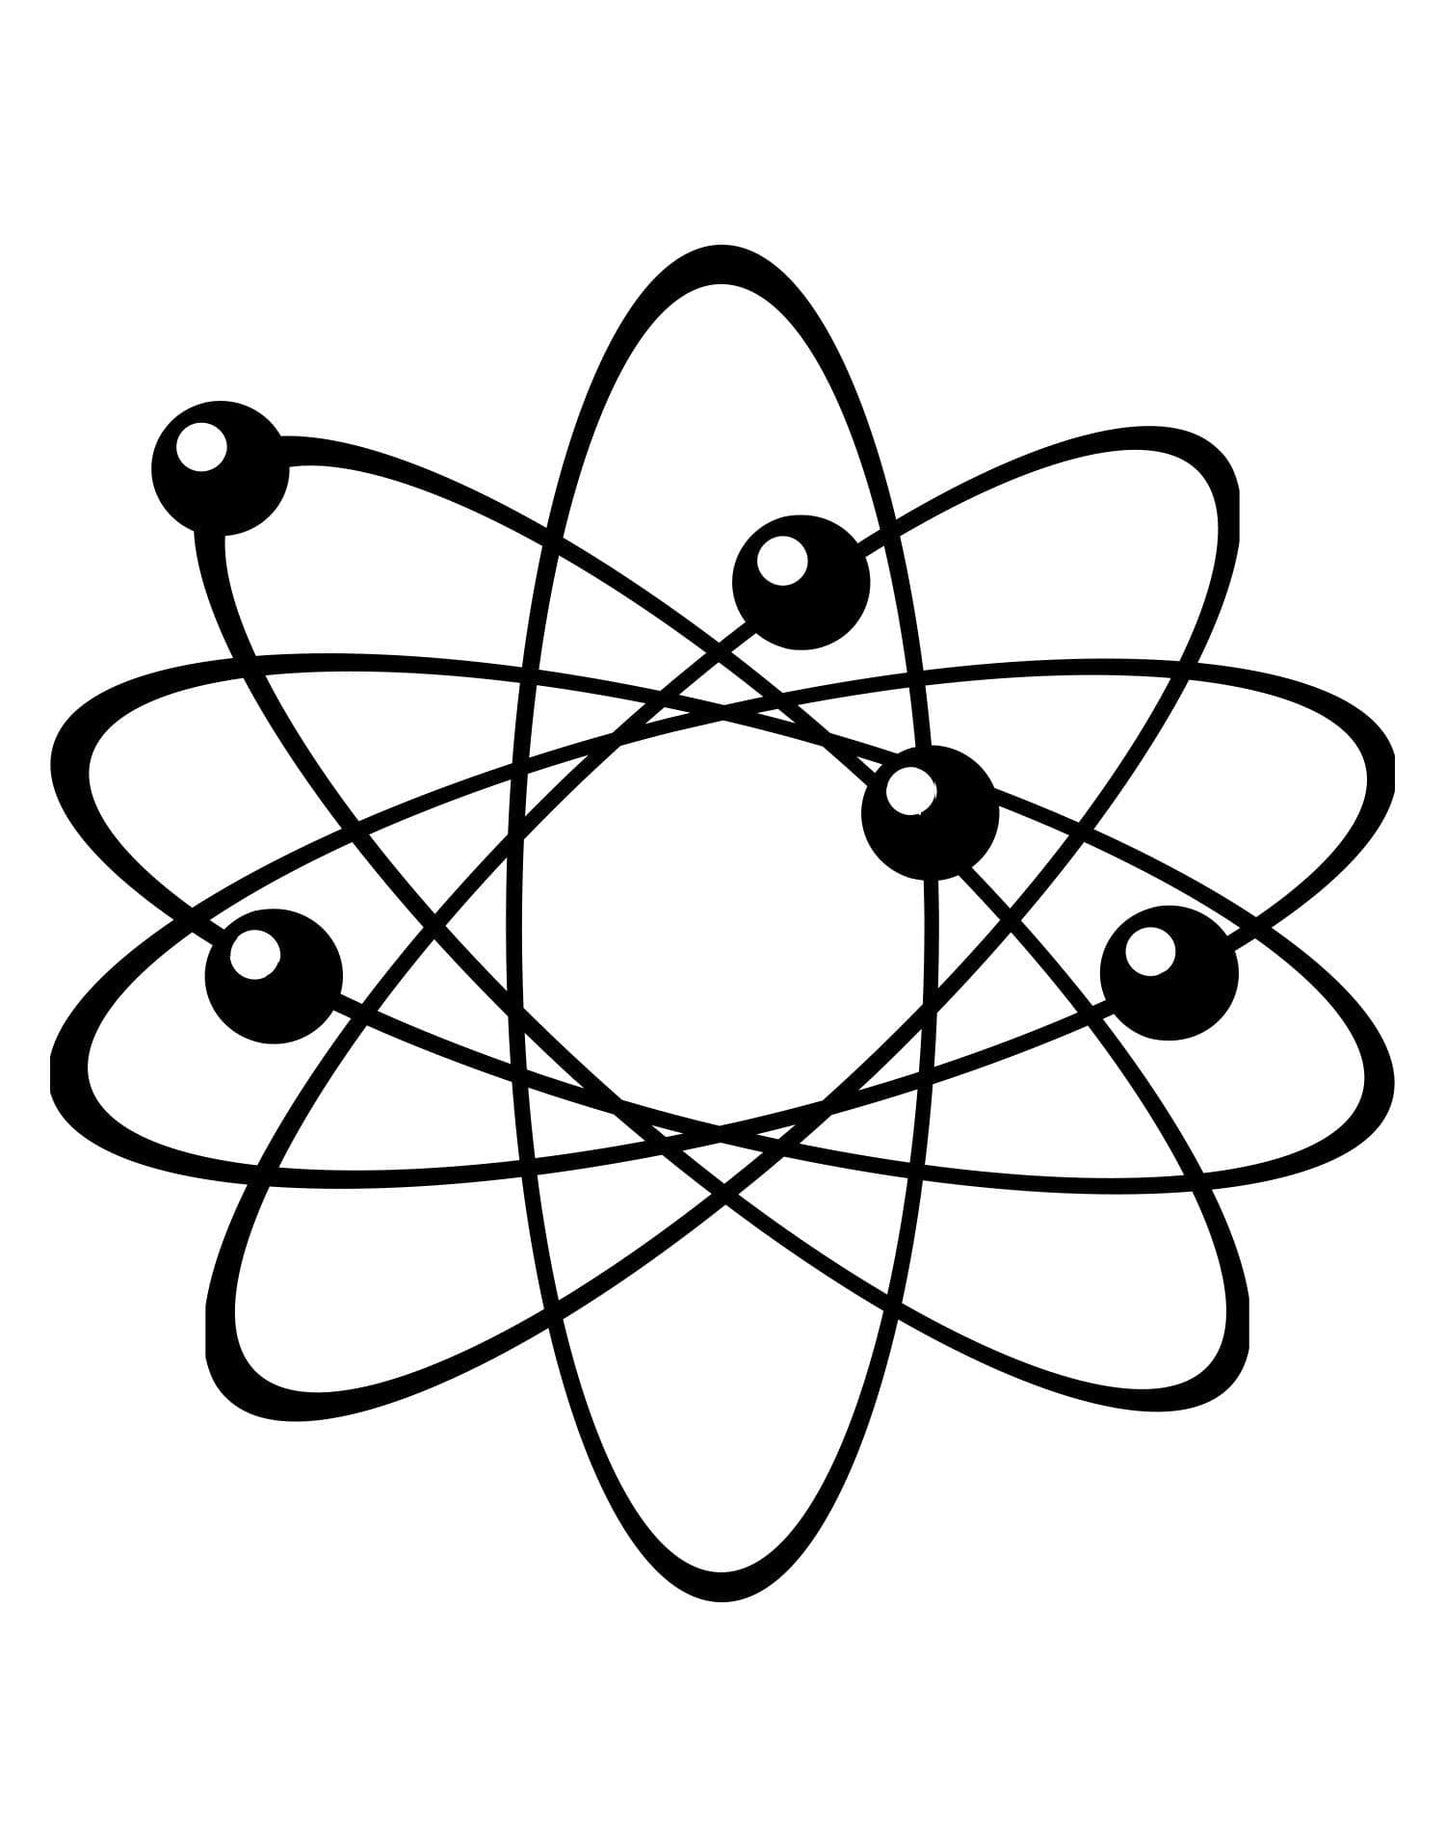 Atom Wall Decal. Electrons, protons and neutrons. Perfect for Science School Decor. Physics. #389